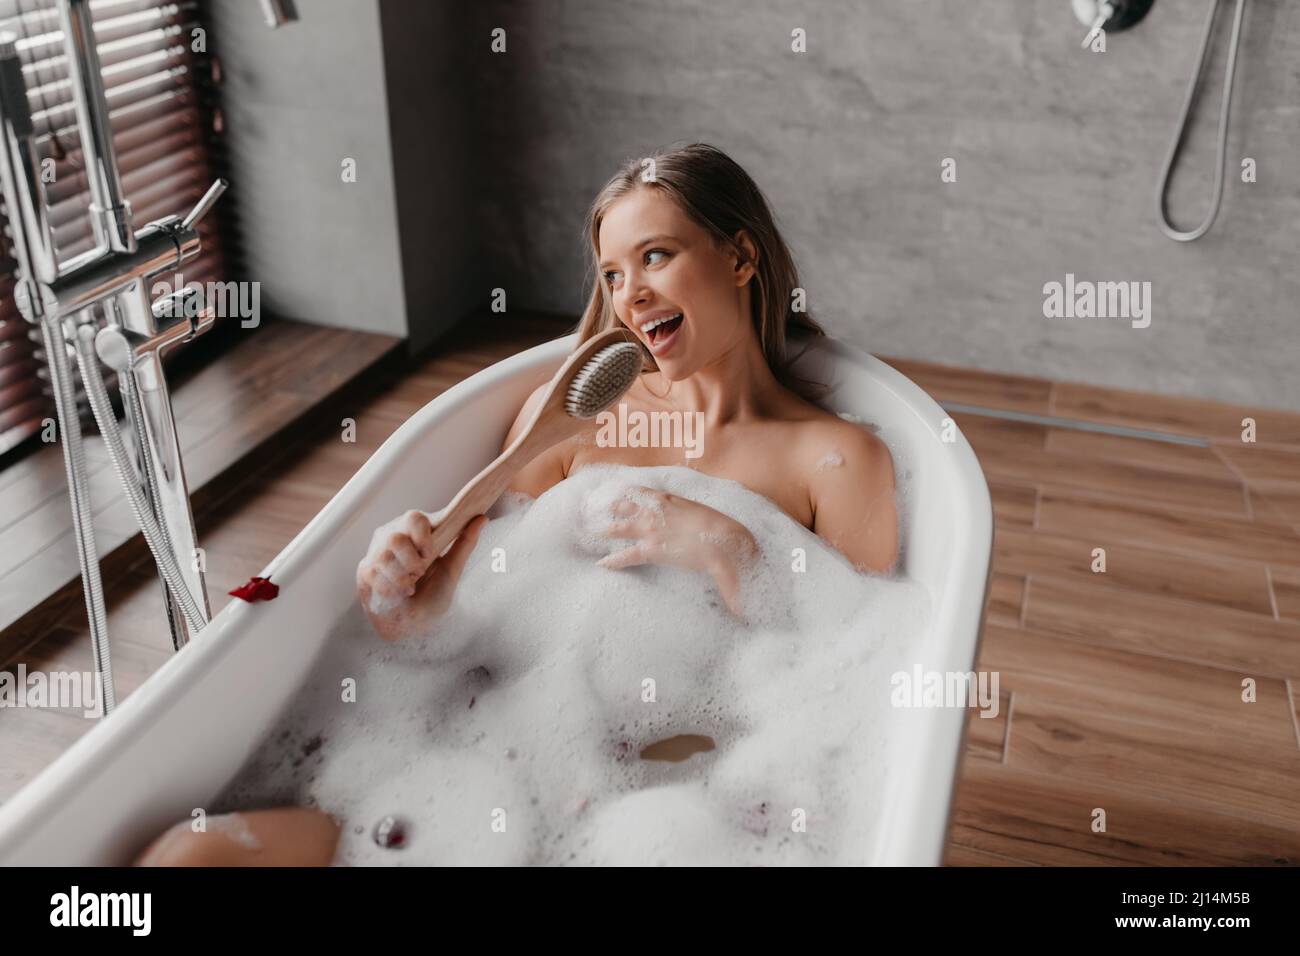 Happy woman singing song holding body brush as microphone, resting in foamy bath at home Stock Photo